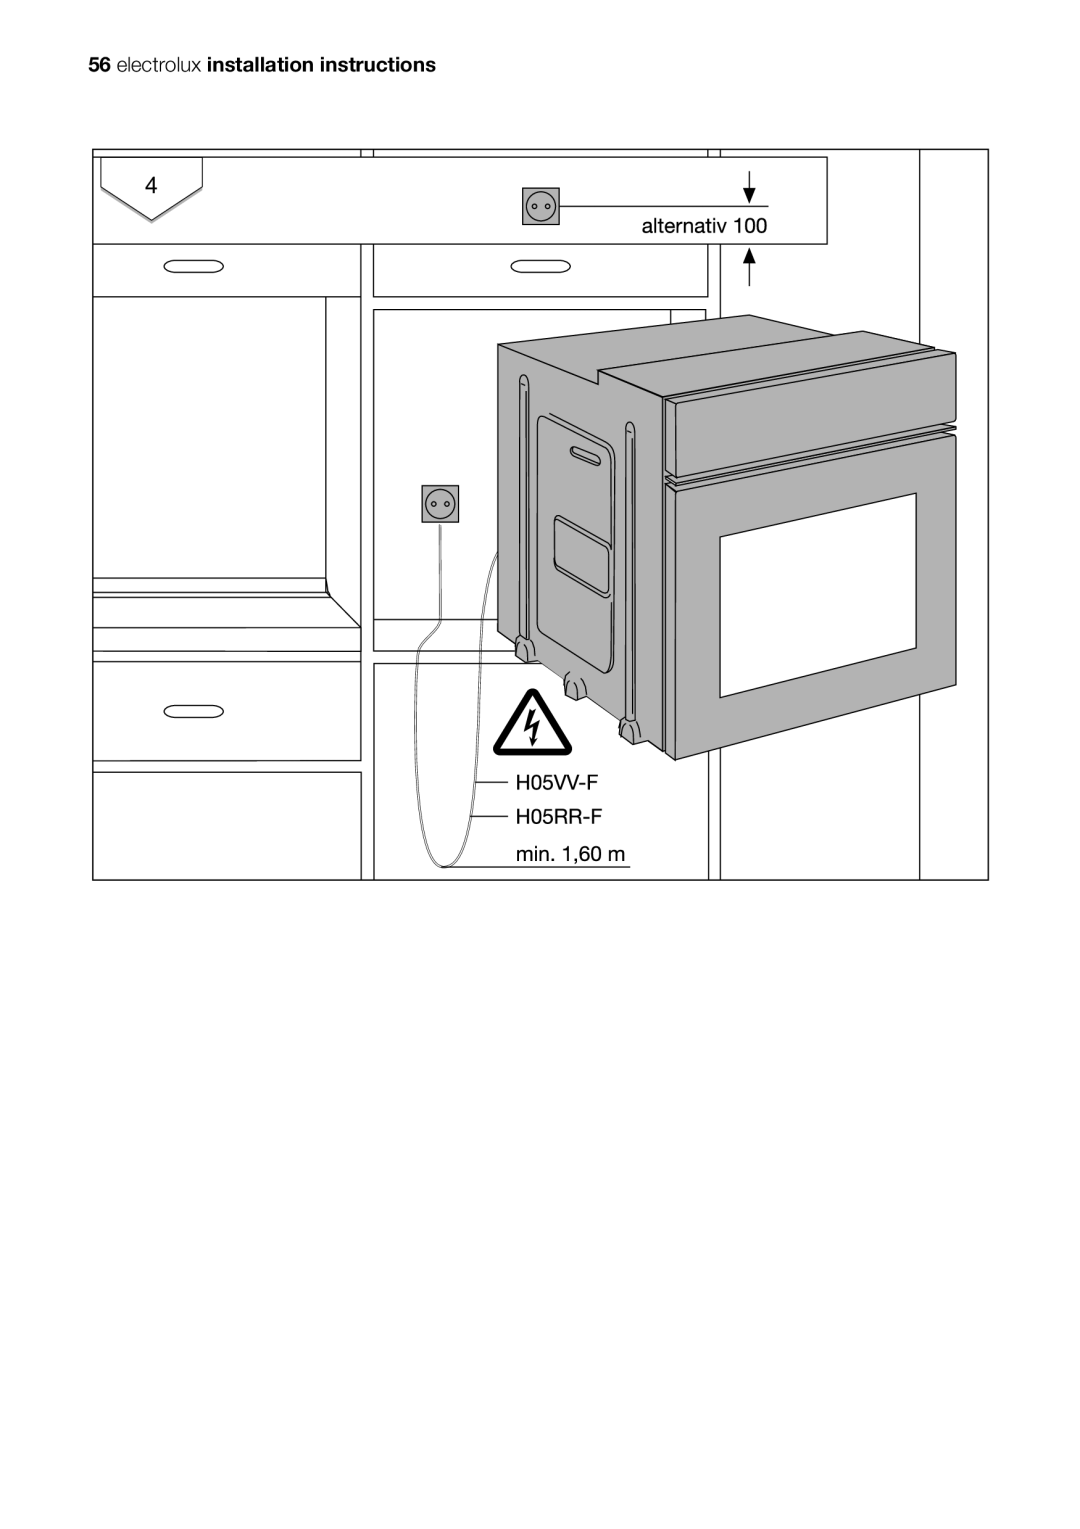 Electrolux EOC65101 user manual Electrolux installation instructions 